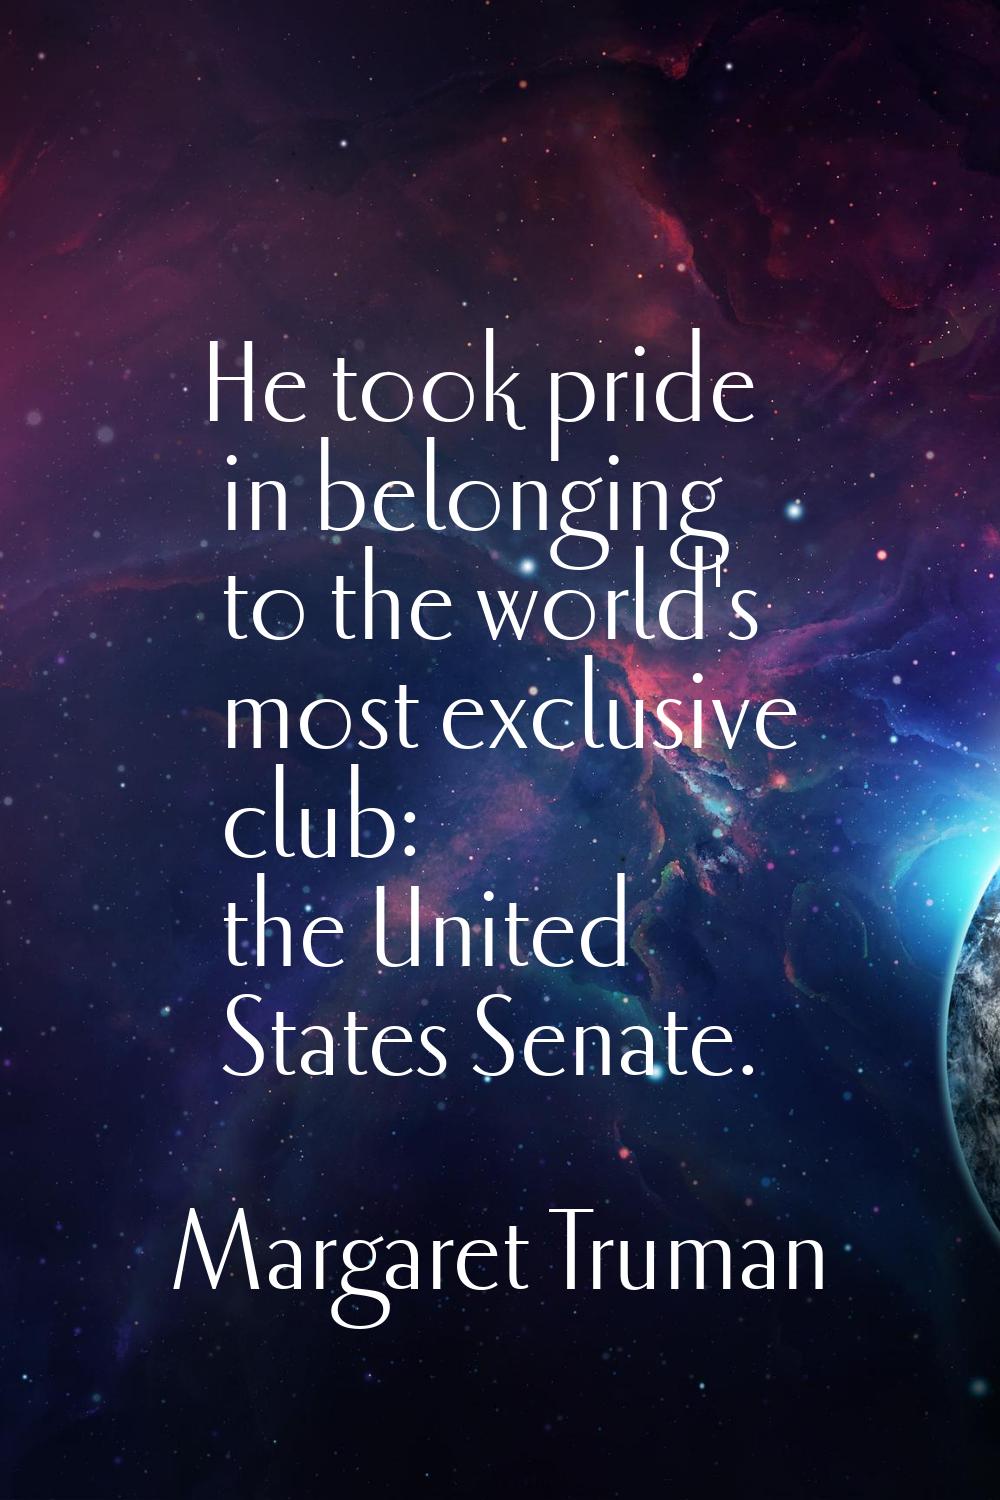 He took pride in belonging to the world's most exclusive club: the United States Senate.